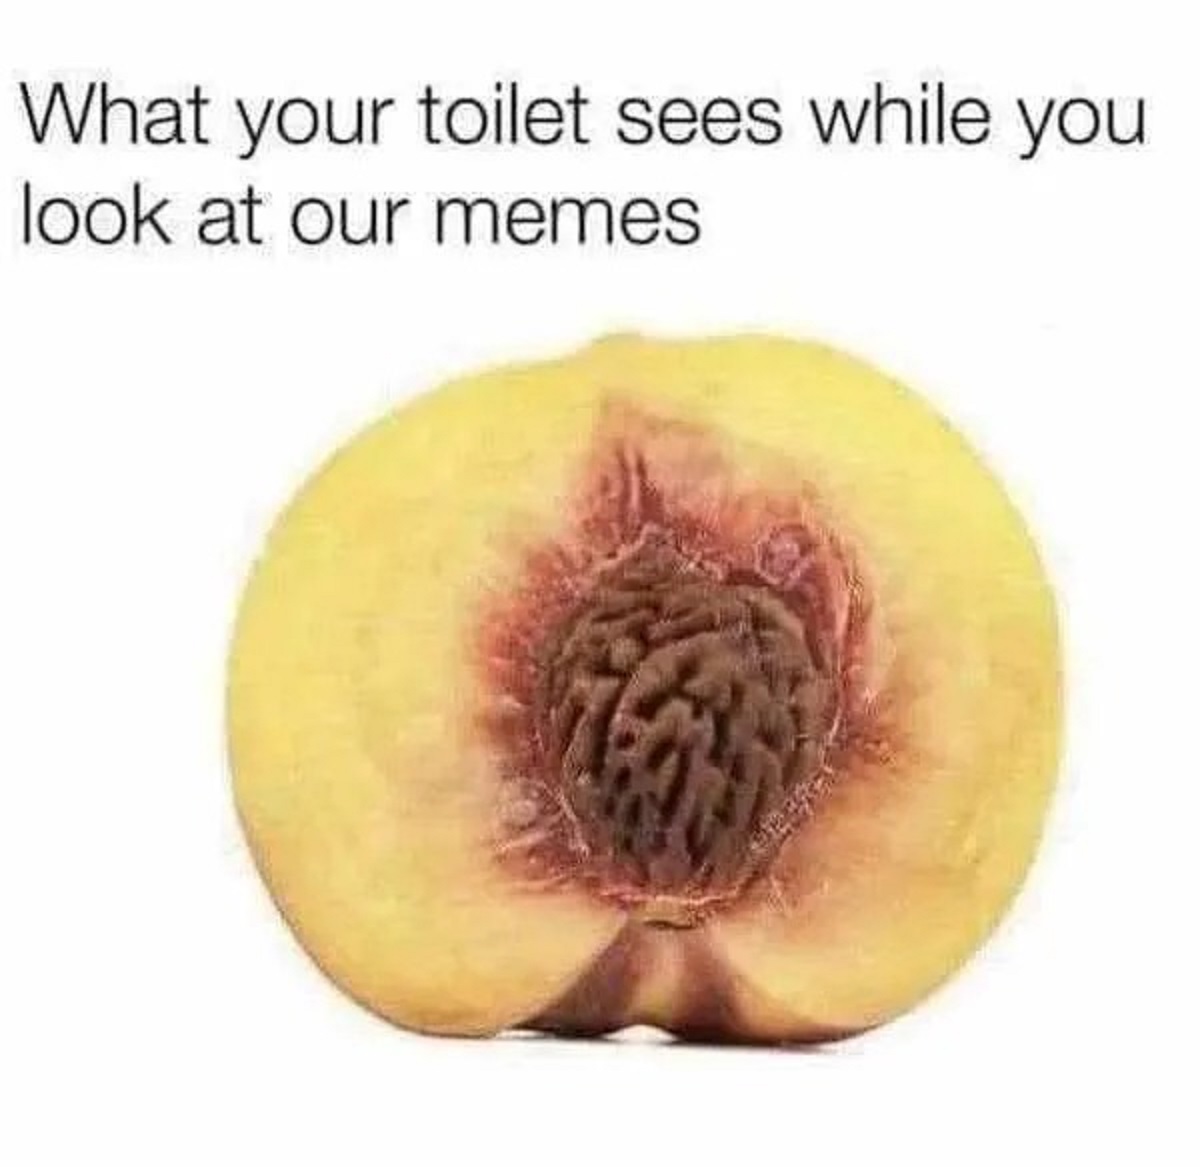 spicy memes - my toilet sees meme - What your toilet sees while you look at our memes